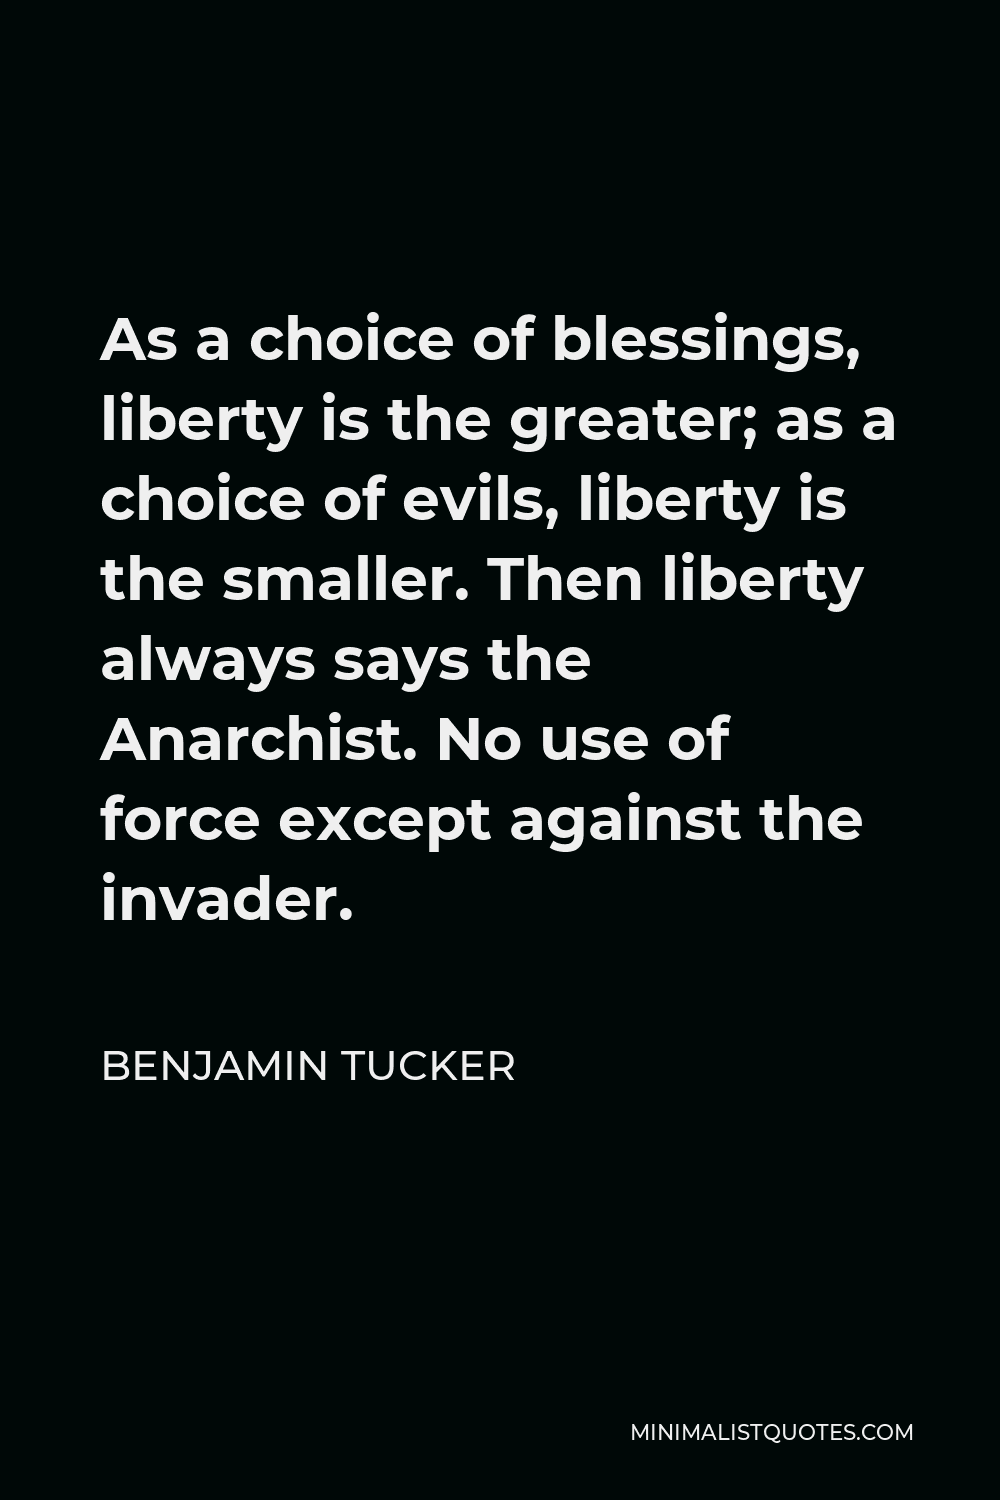 Benjamin Tucker Quote - As a choice of blessings, liberty is the greater; as a choice of evils, liberty is the smaller. Then liberty always says the Anarchist. No use of force except against the invader.